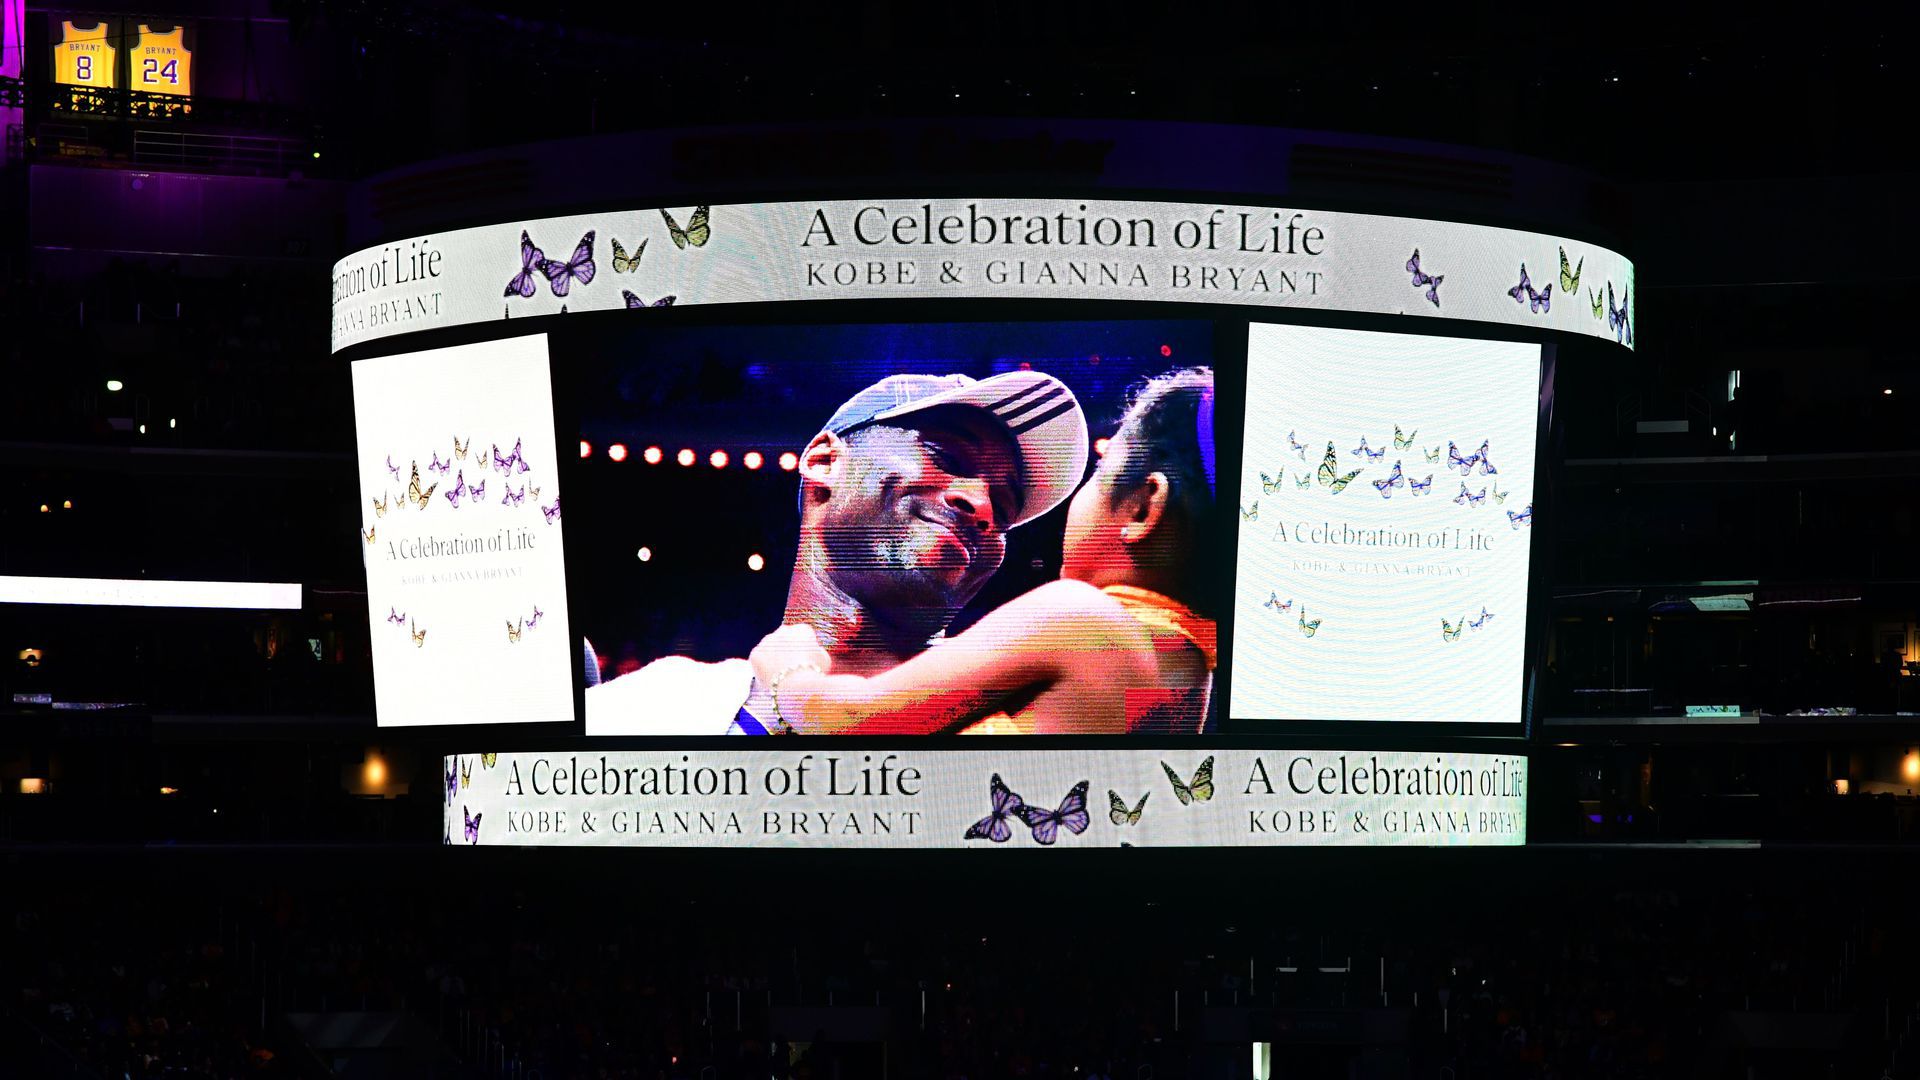 Kobe Bryant Memorial Service Videos And Photos From The Event Axios